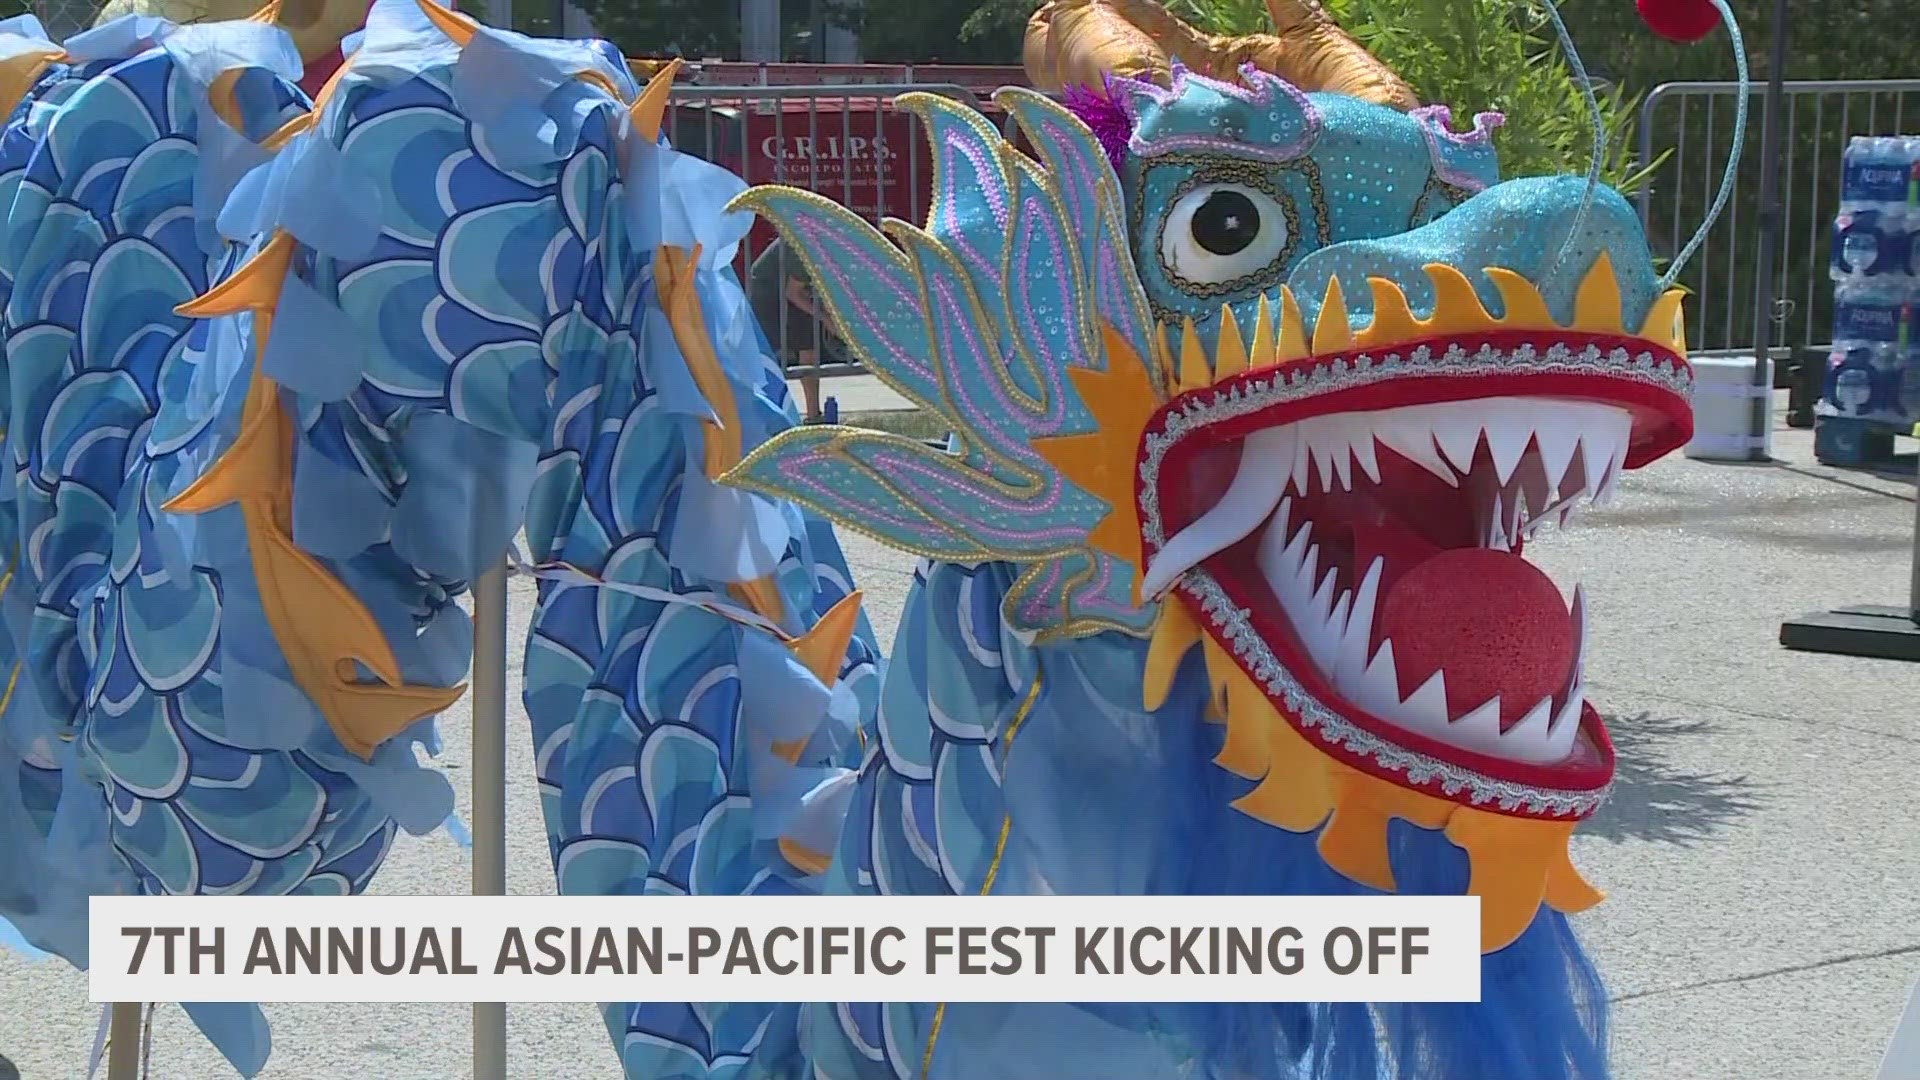 You're invited to visit Calder Plaza this weekend to immerse yourself in Asian-Pacific culture, music, food and much more.